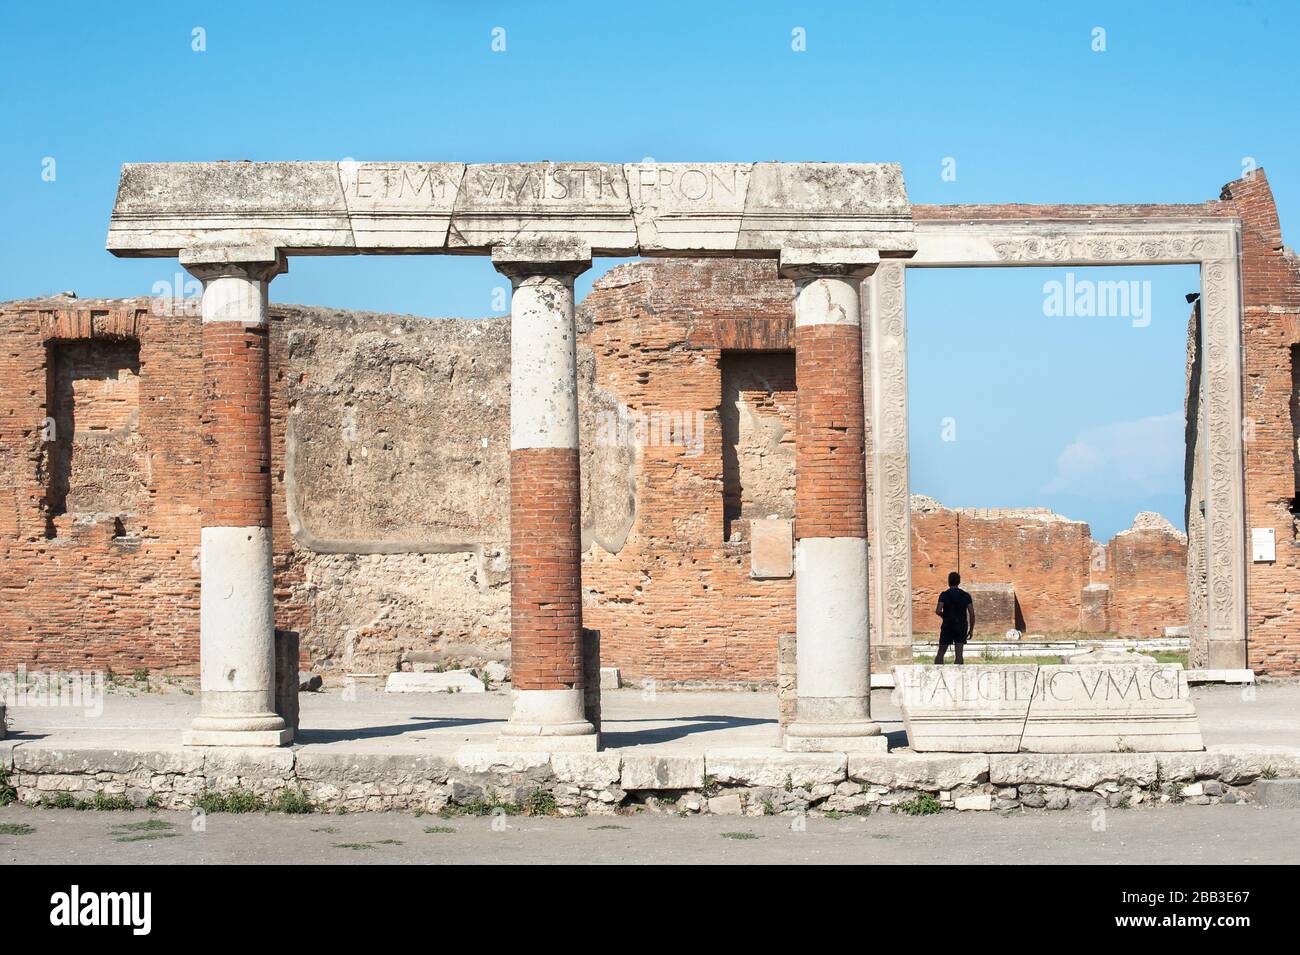 A tourist stands in the doorway of the Building of Eumachia, Pompeii, Italy Stock Photo